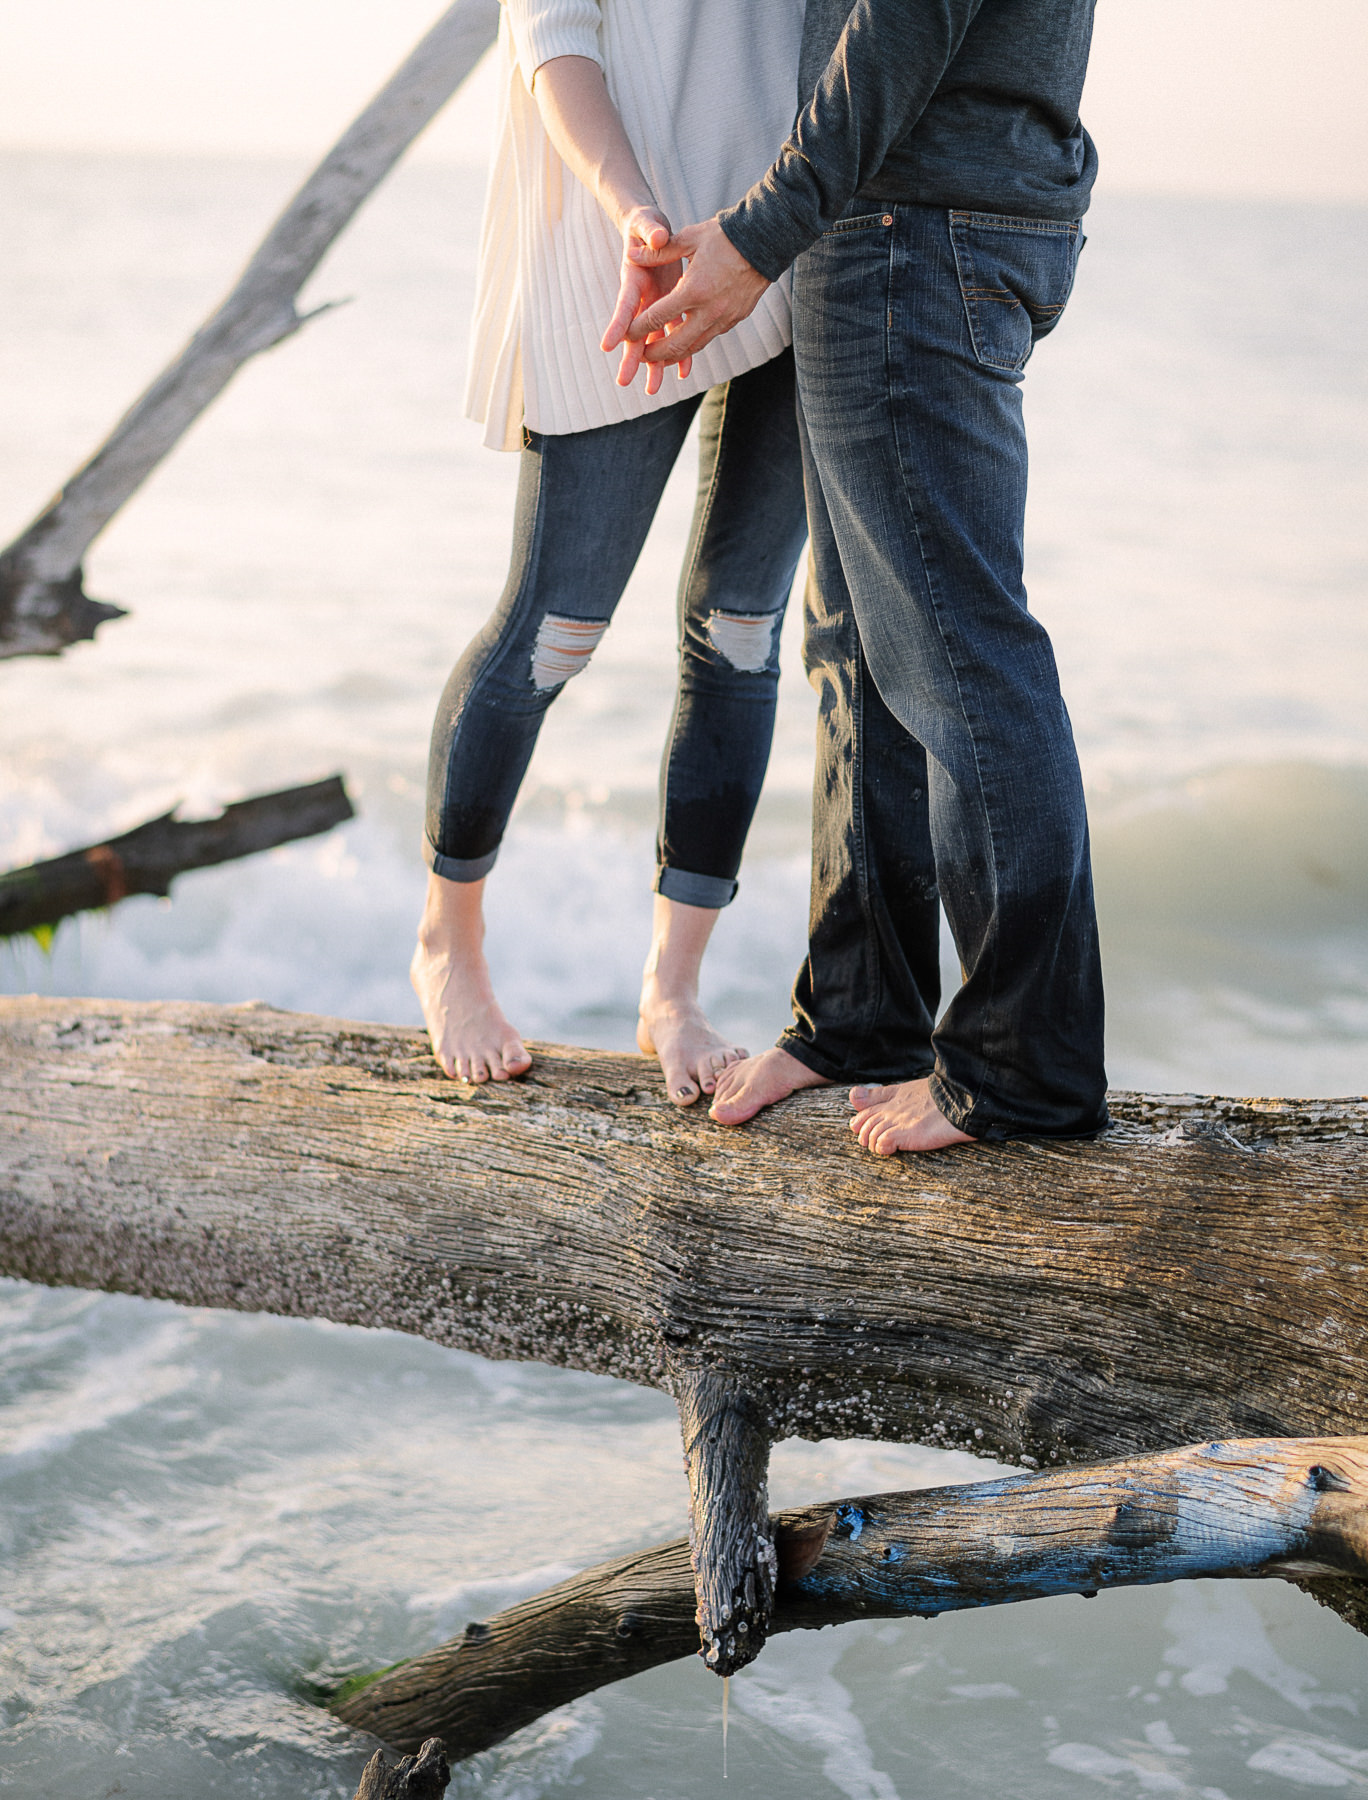 Beer Can Island Florida Engagement Session